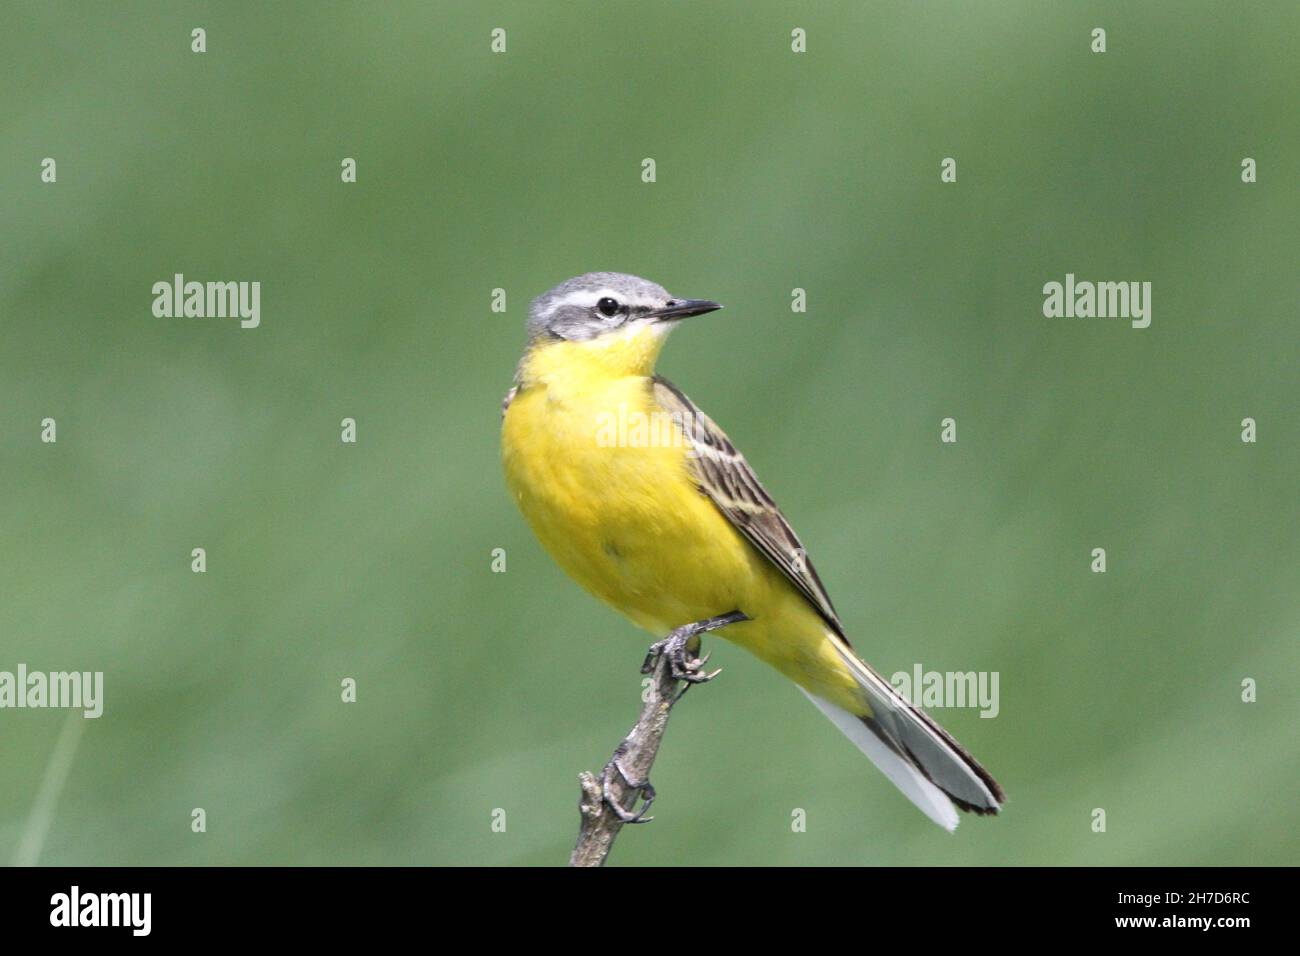 Male of Yellow Wagtail (Motacilla flava)  perched on a twig in a saltmarsh near Sehestedt, Germany Stock Photo